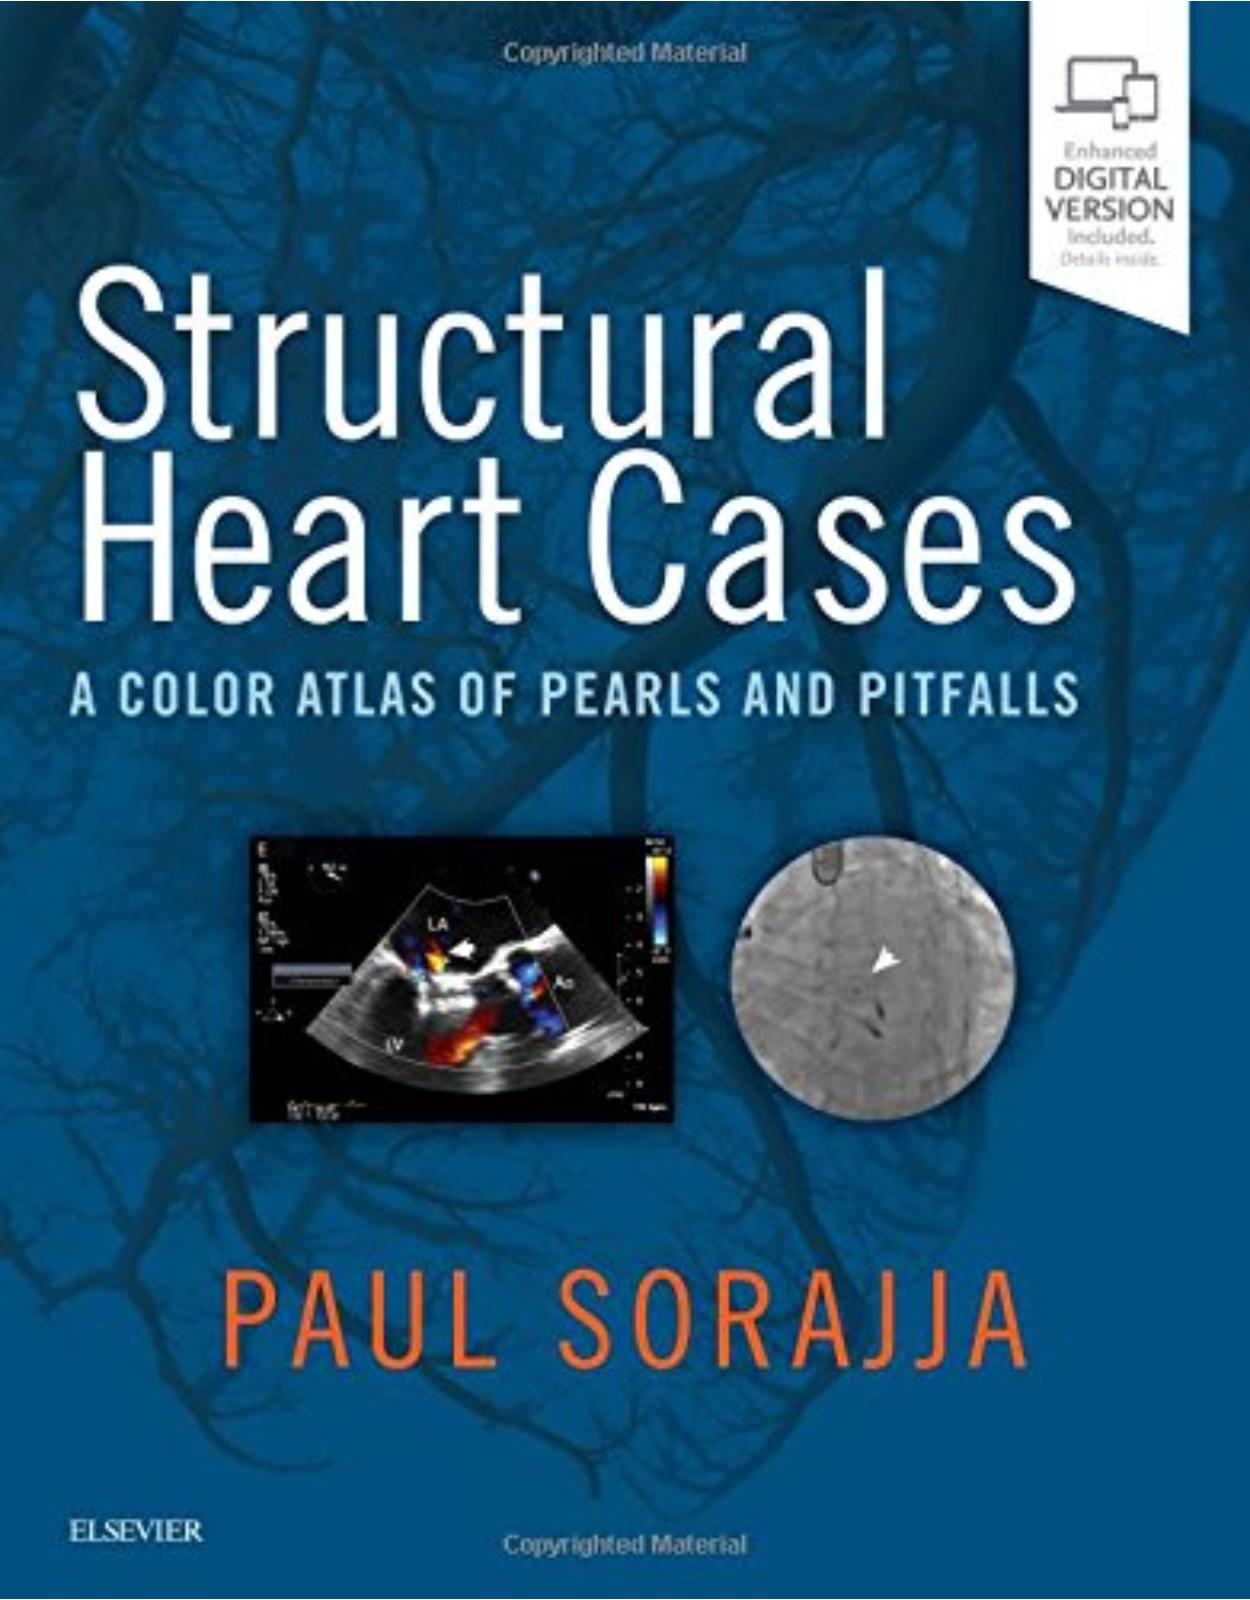 Structural Heart Cases